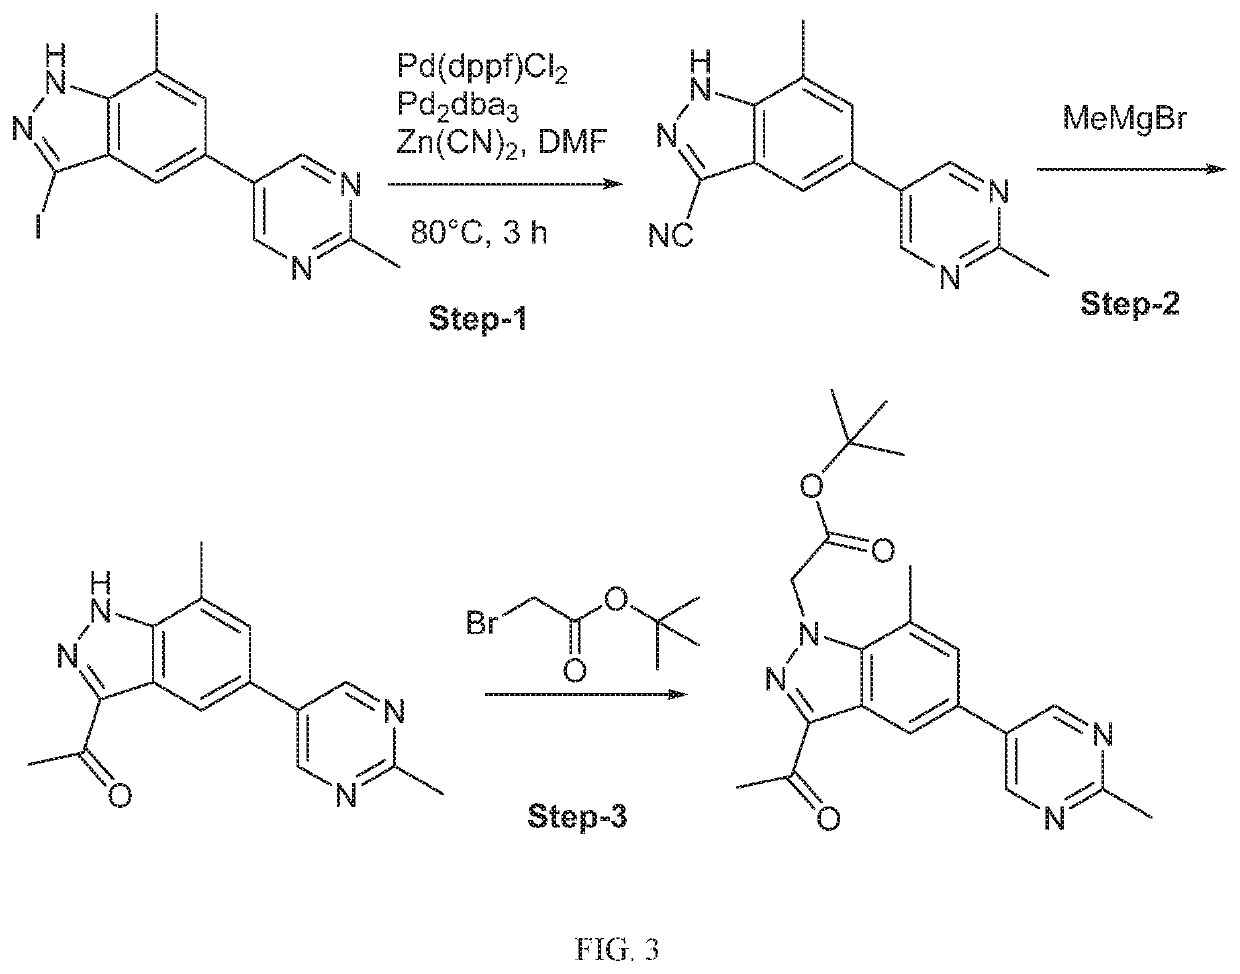 Aryl, heteroaryl, and heterocyclic pharmaceutical compounds for treatment of medical disorders